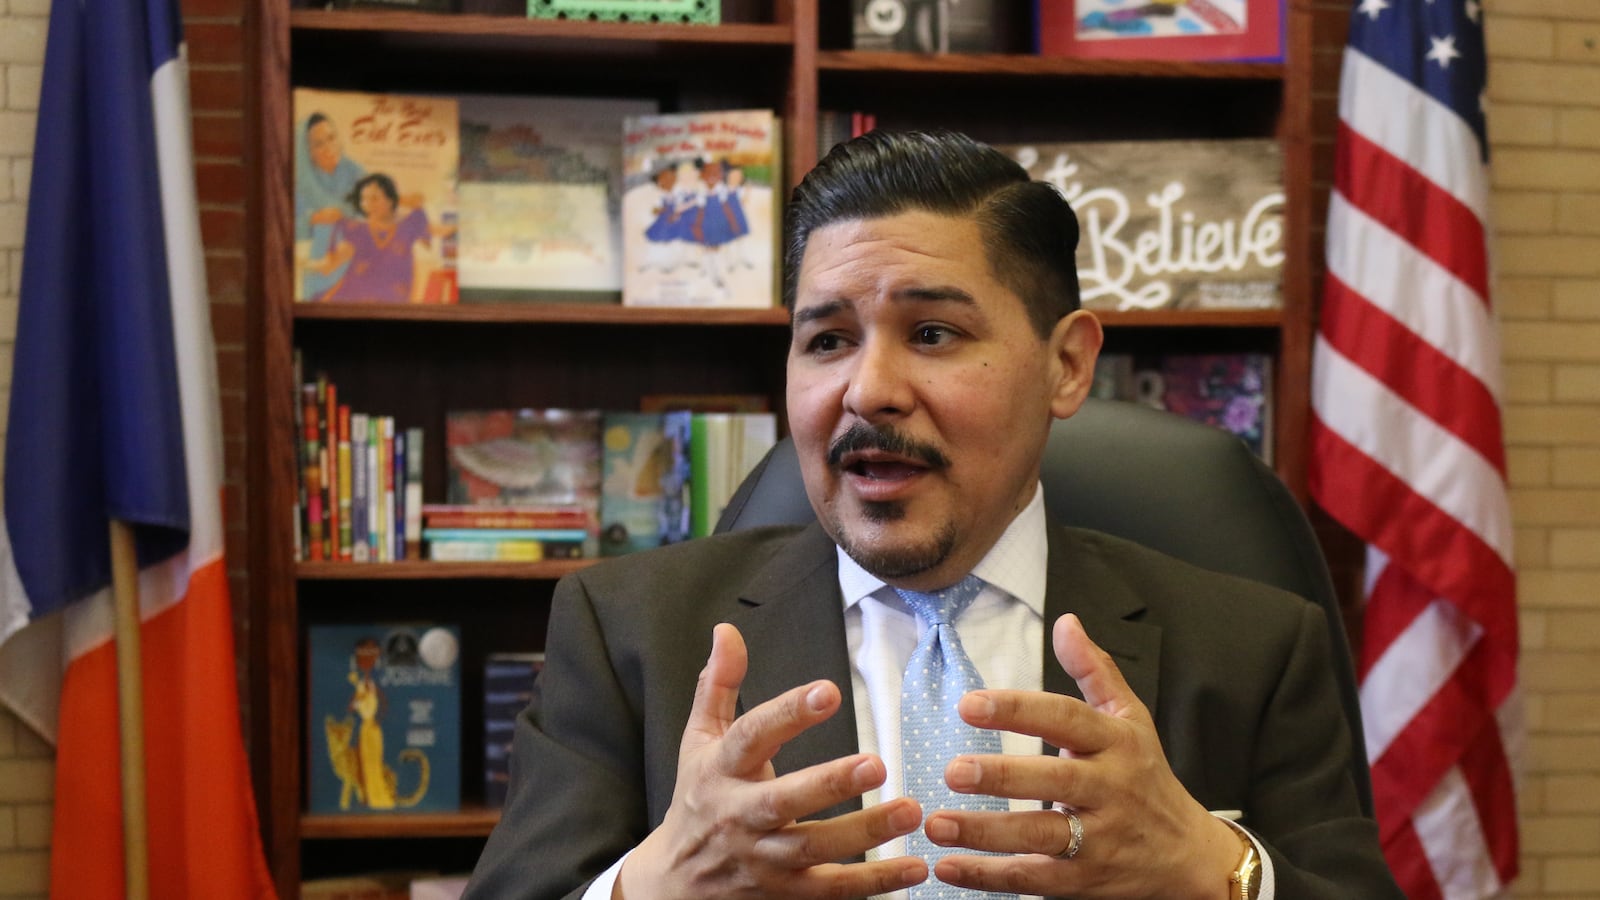 Schools Chancellor Richard Carranza at Tweed Courthouse, the education department's headquarters.